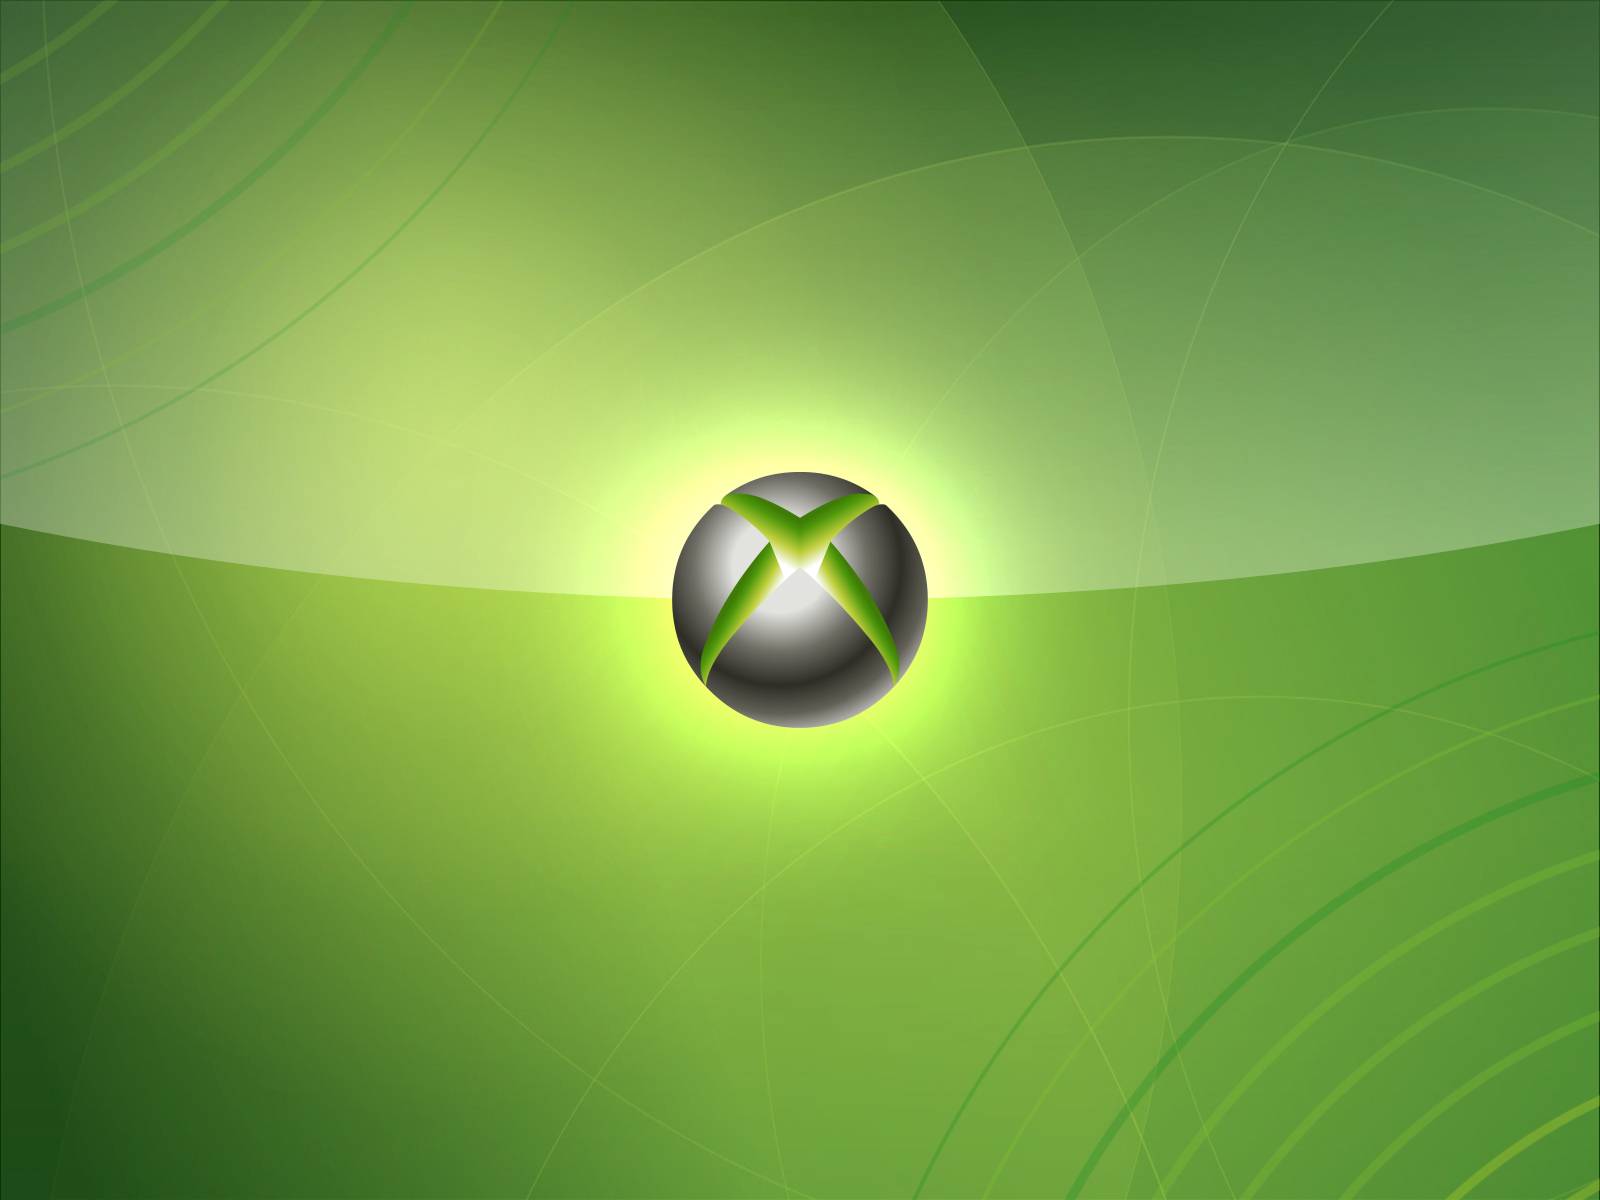 Xbox wallpapers wallpaper xbox live wallpaper | Chainimage